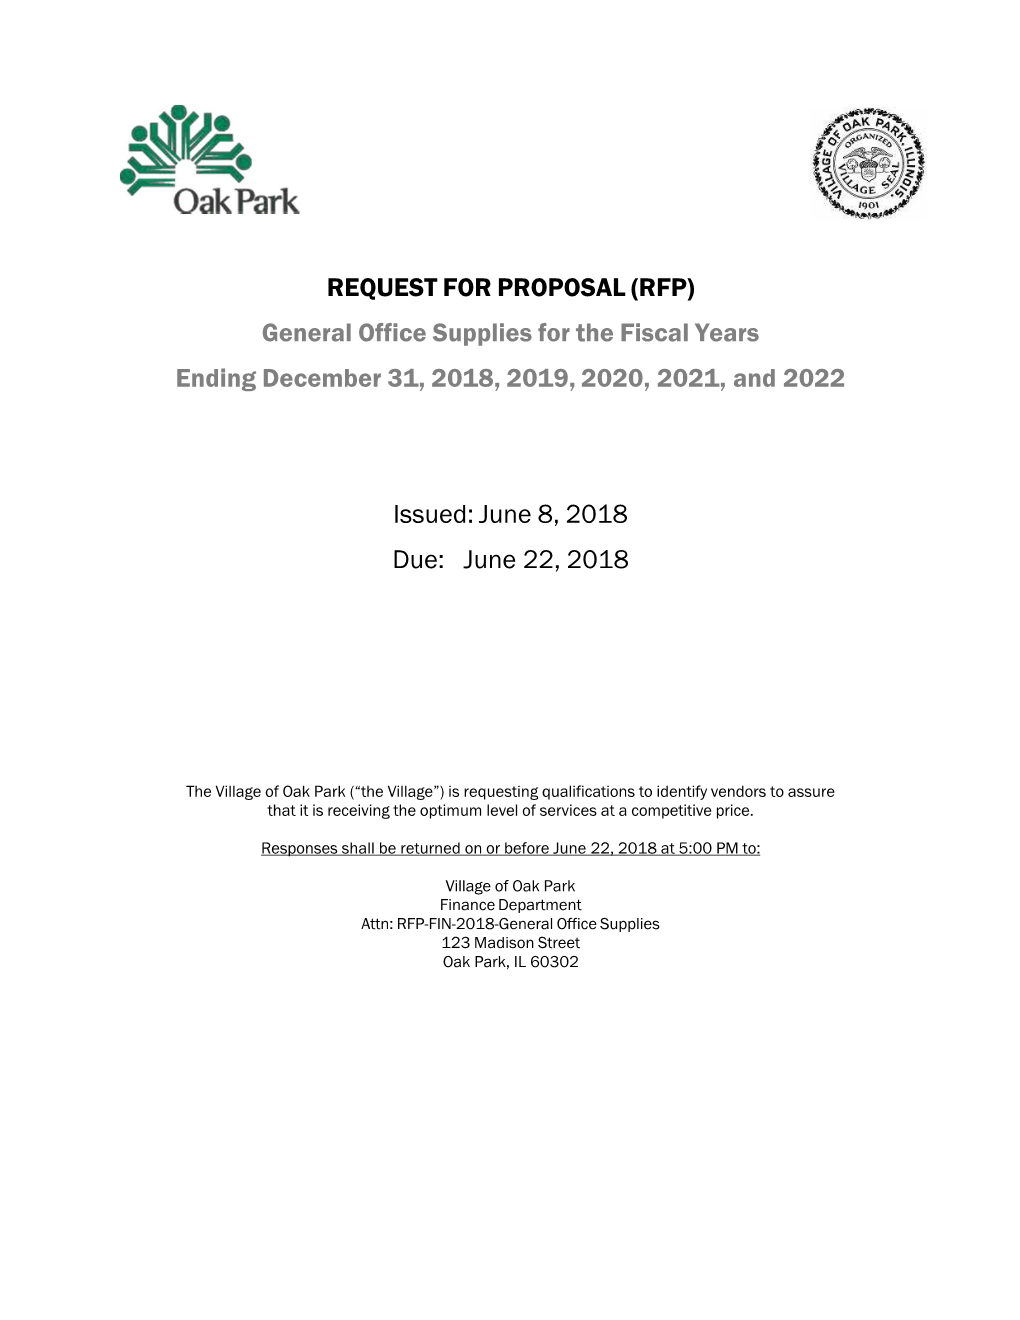 REQUEST for PROPOSAL (RFP) General Office Supplies for the Fiscal Years Ending December 31, 2018, 2019, 2020, 2021, and 2022